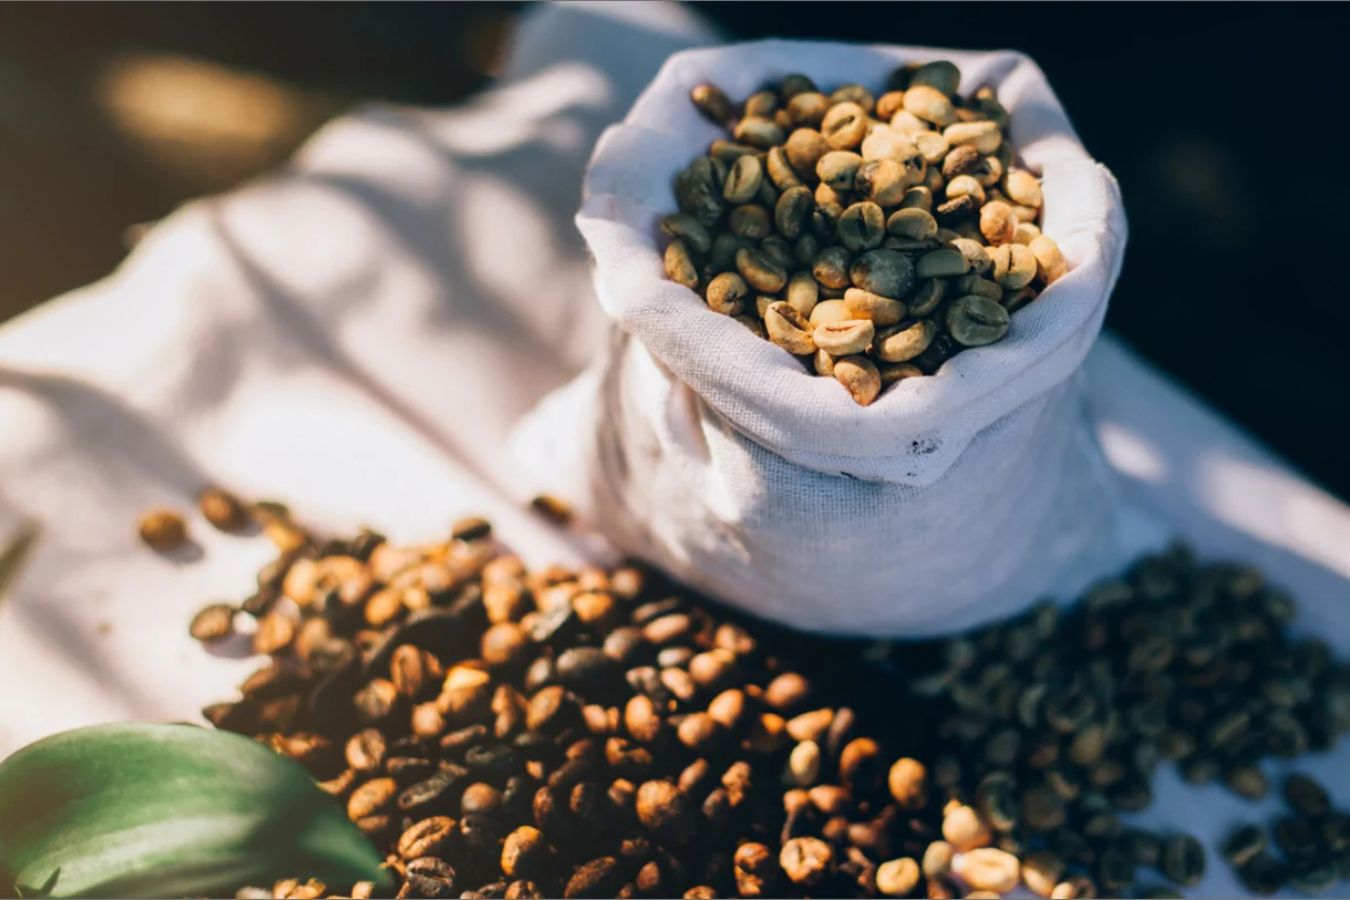 Comparing Arabica and Robusta coffee quality in Vietnam  